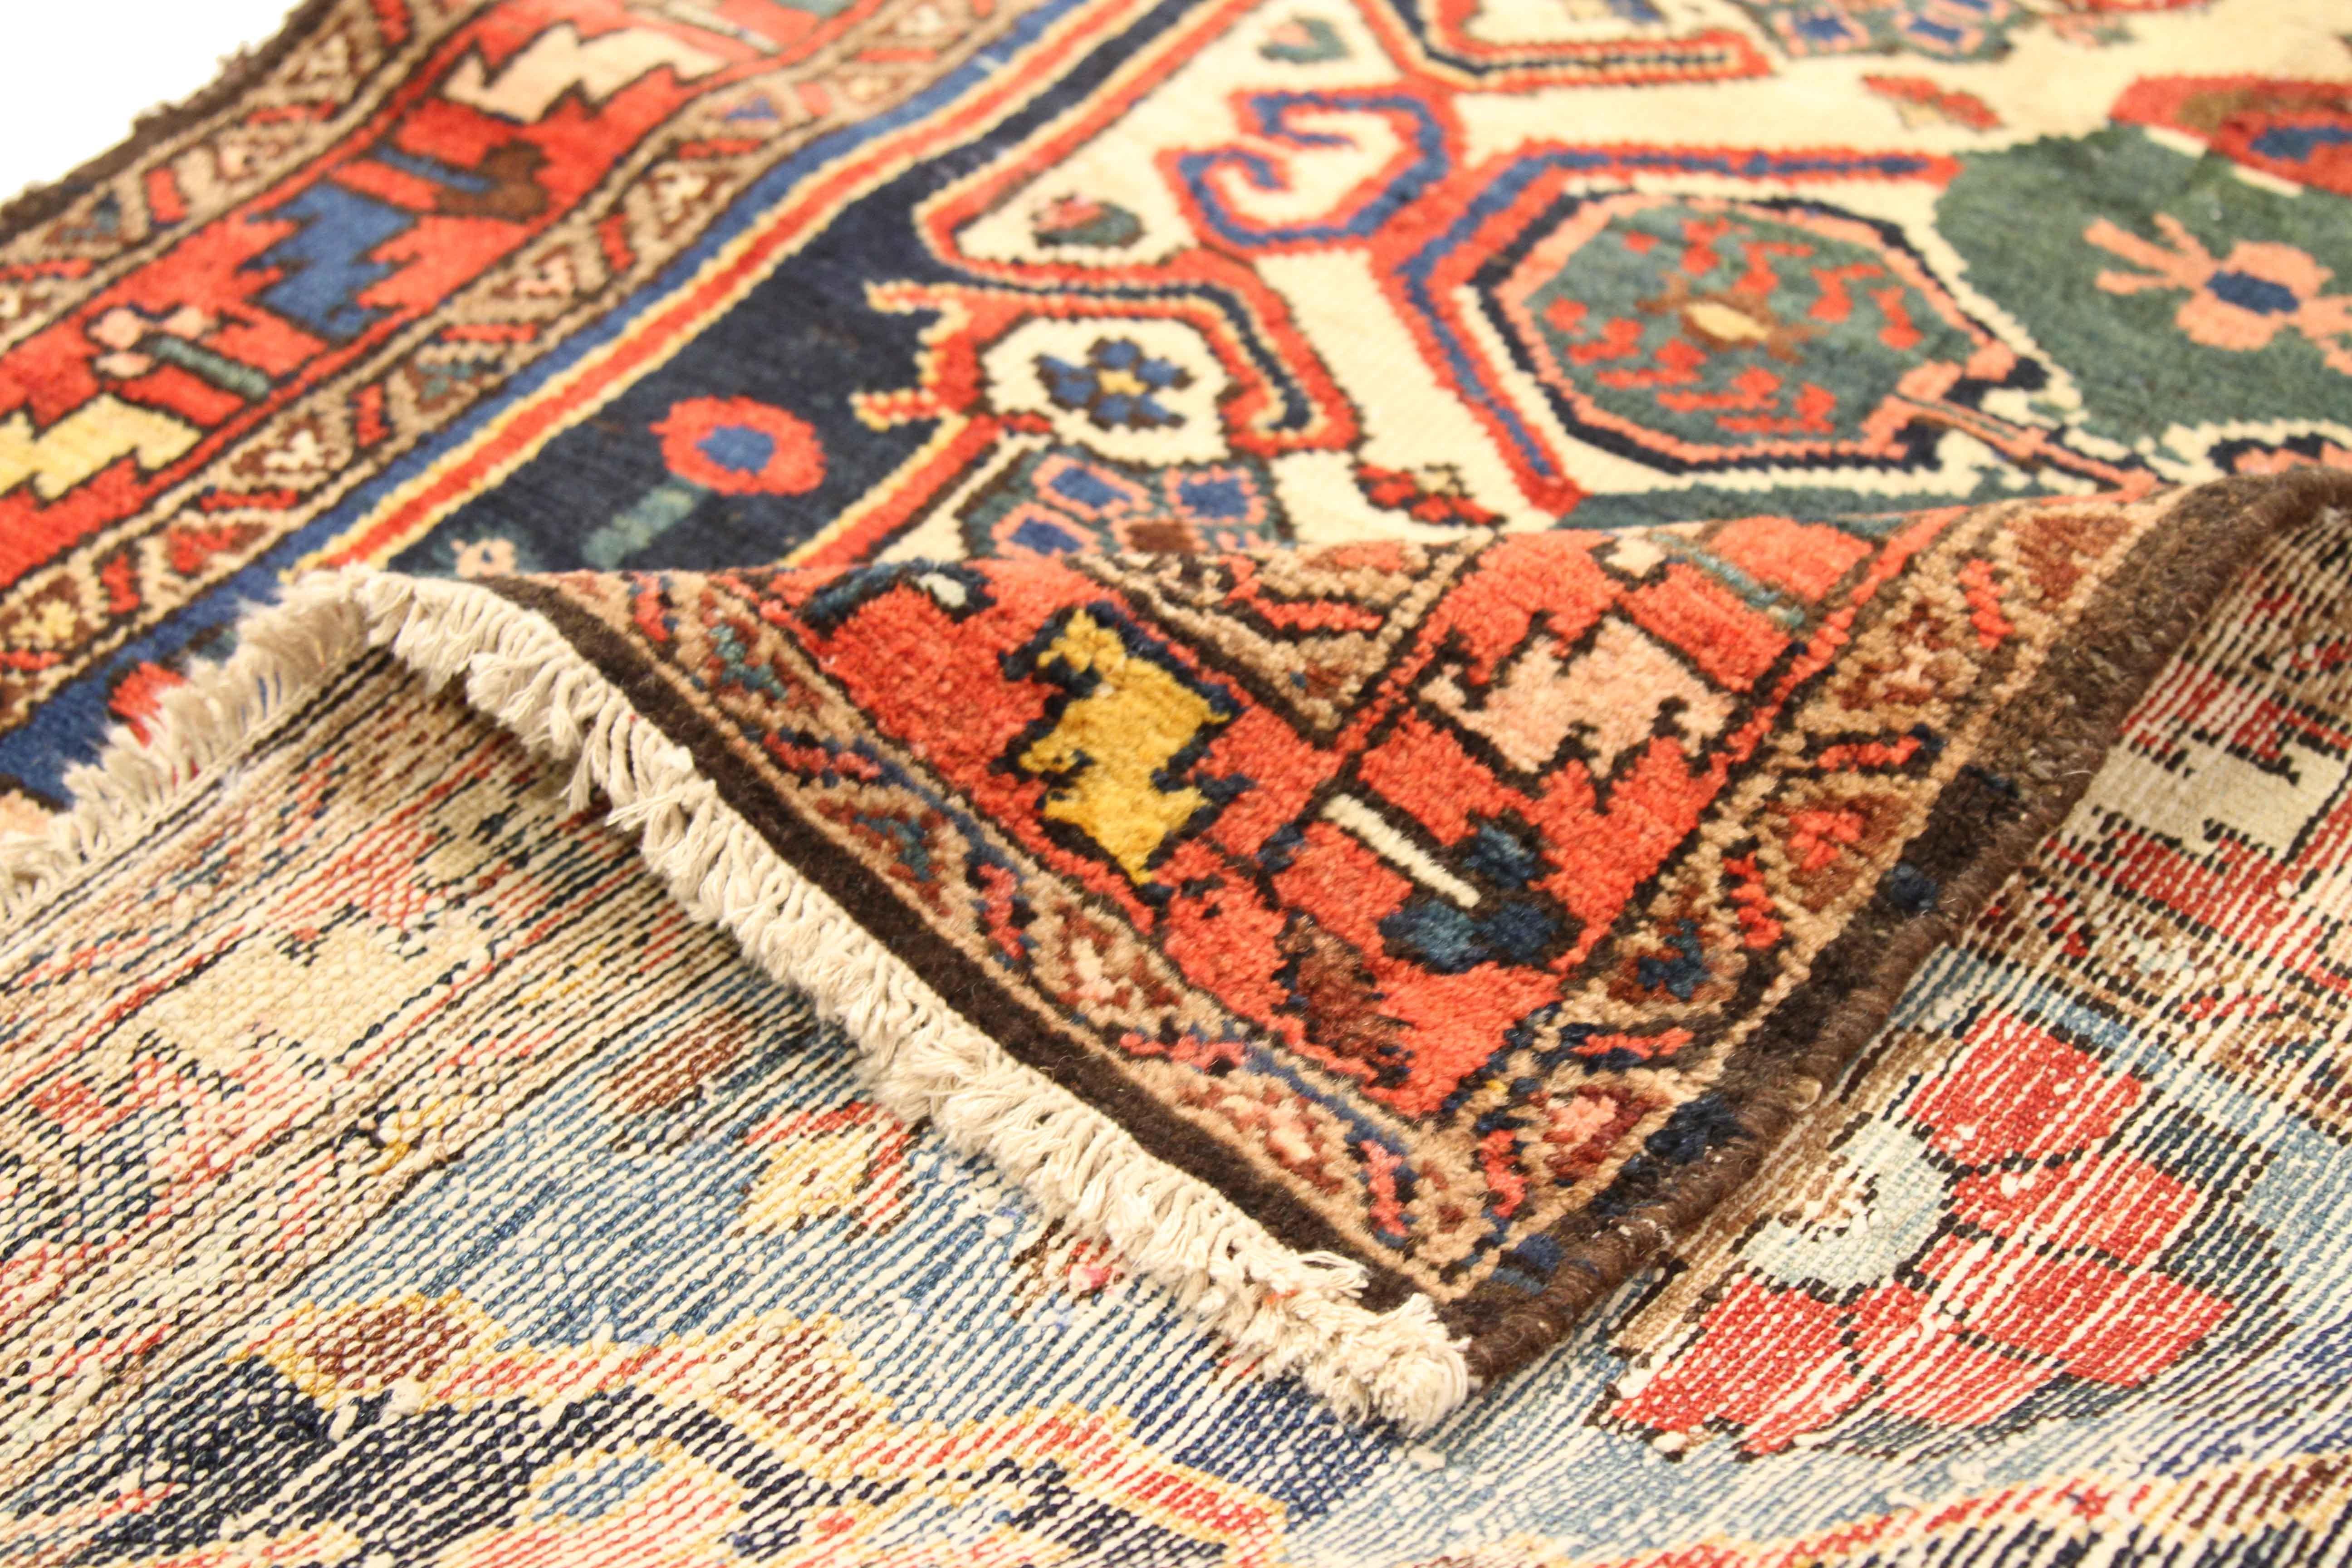 1950s Antique Persian Bakhtiar Runner Rug with Ivory & Red Geometric Medallions  In Excellent Condition For Sale In Dallas, TX